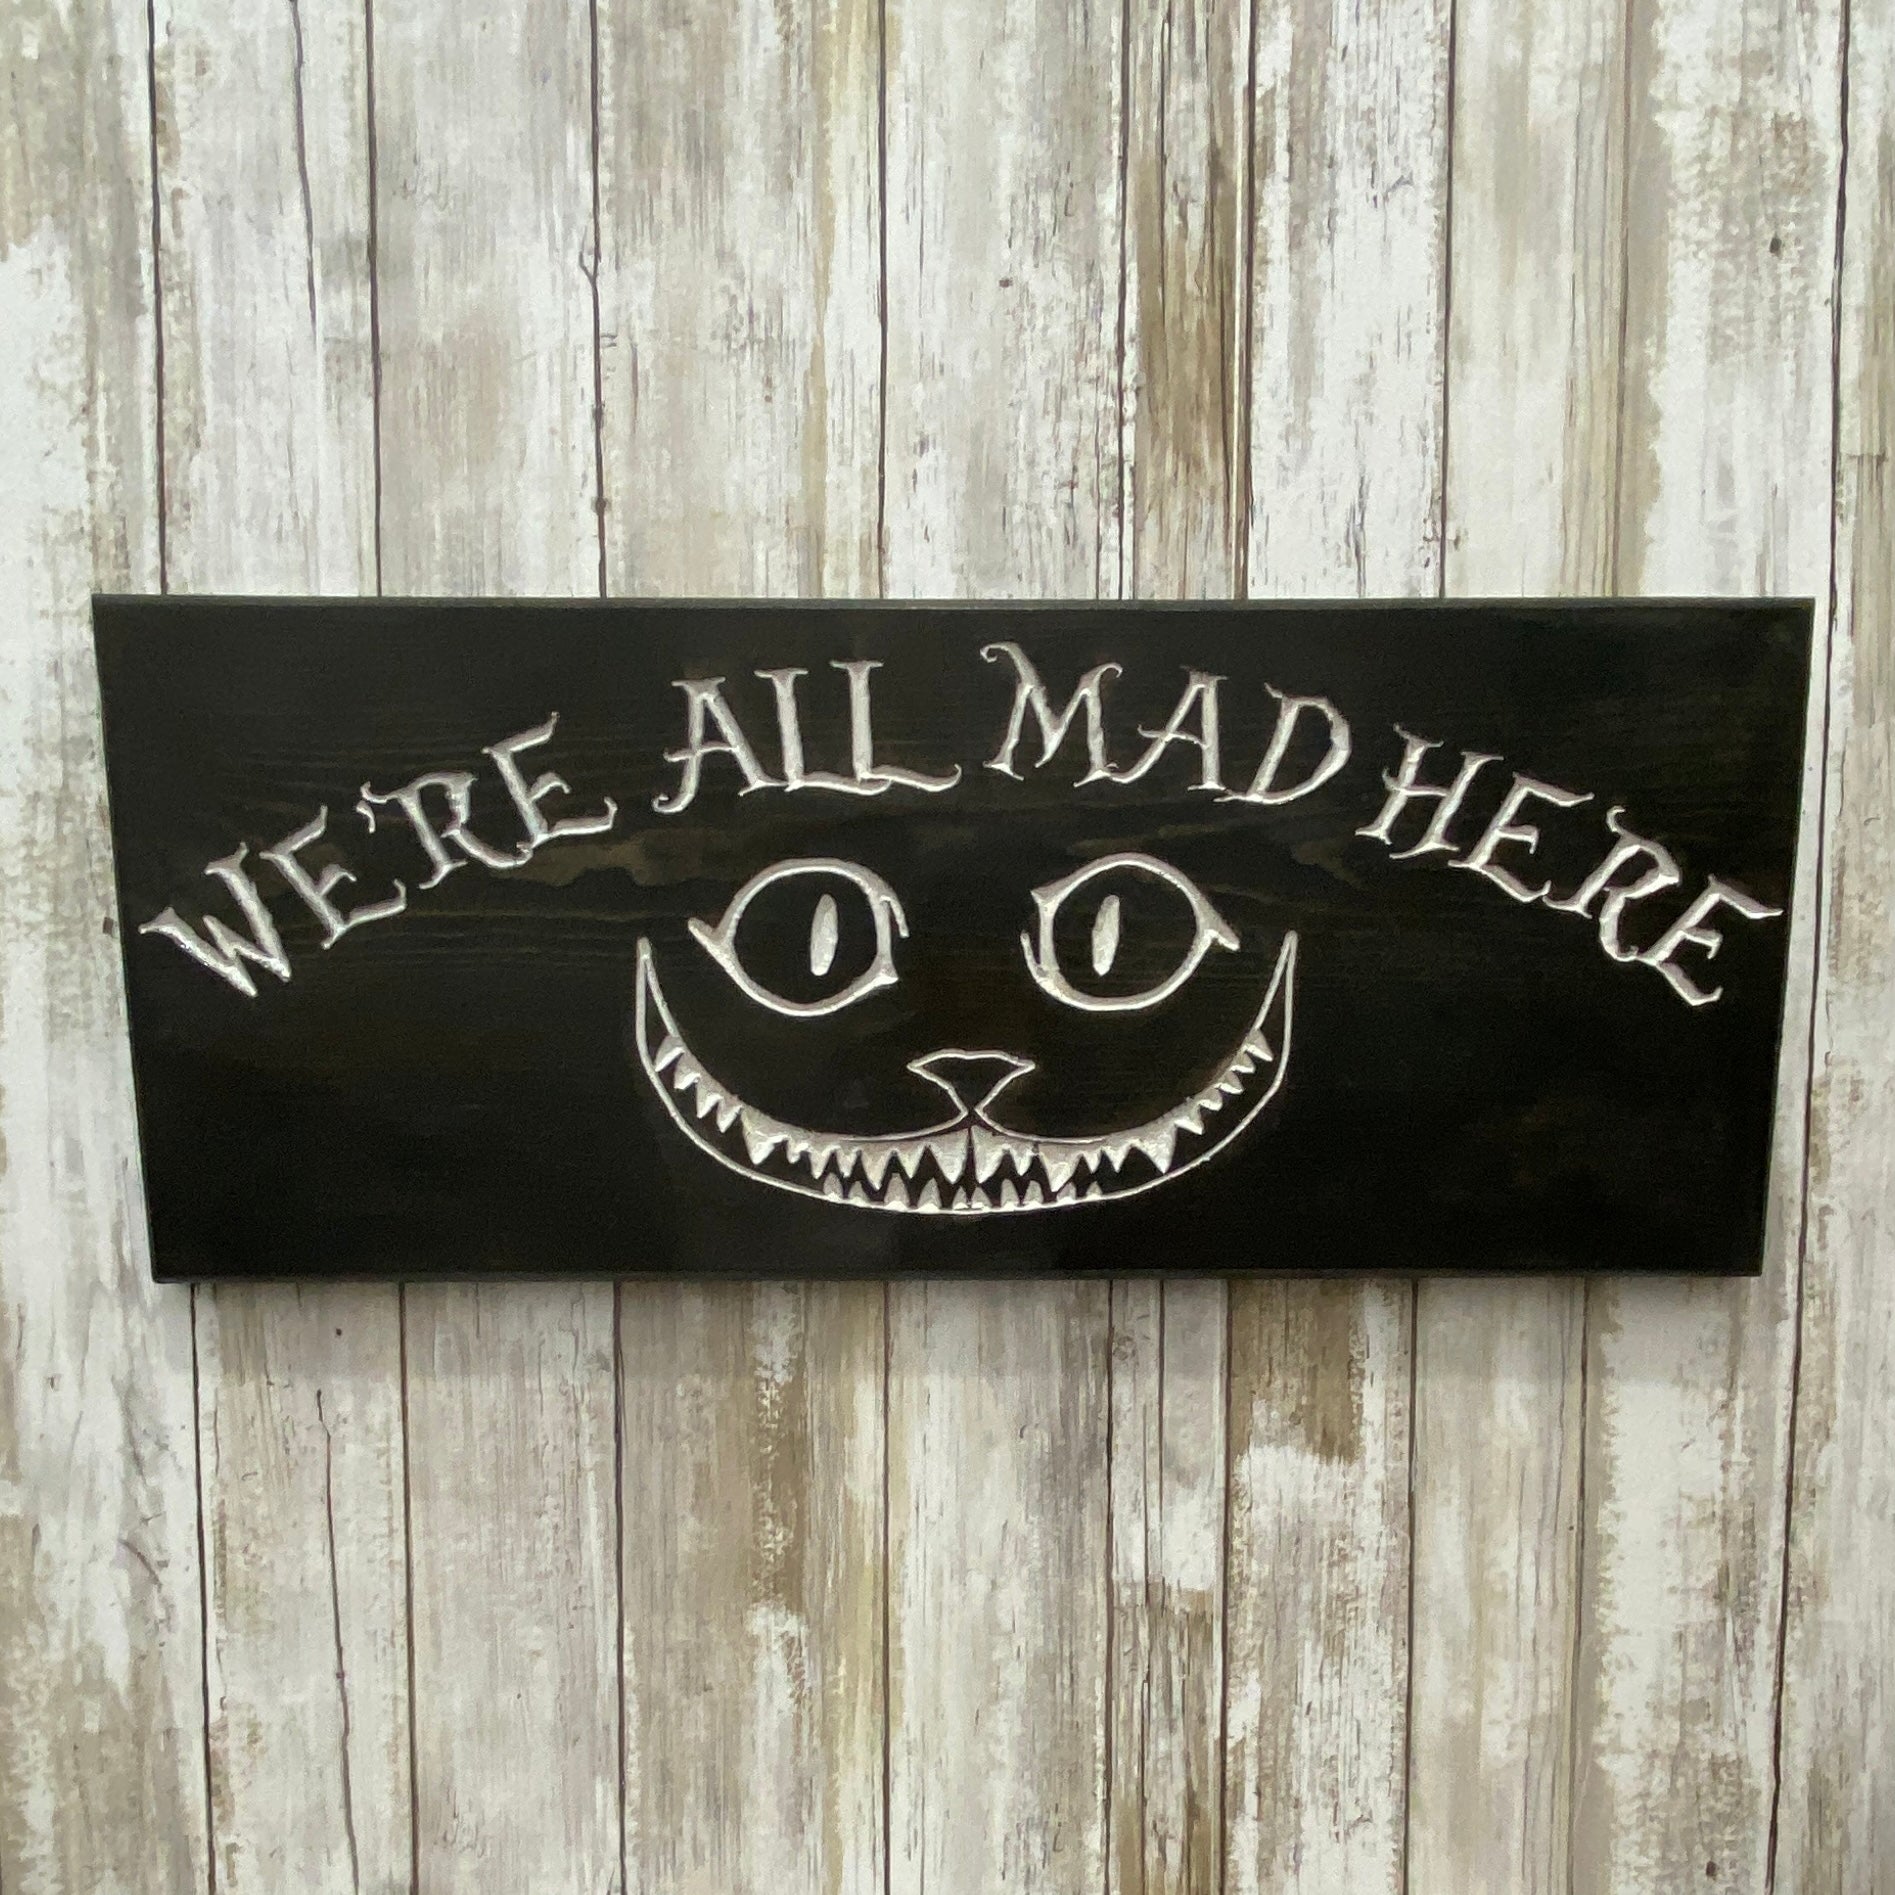 We're All Mad Here - Cheshire Cat Smile Alice in Wonderland Quote Sign - Carved Pine Wood